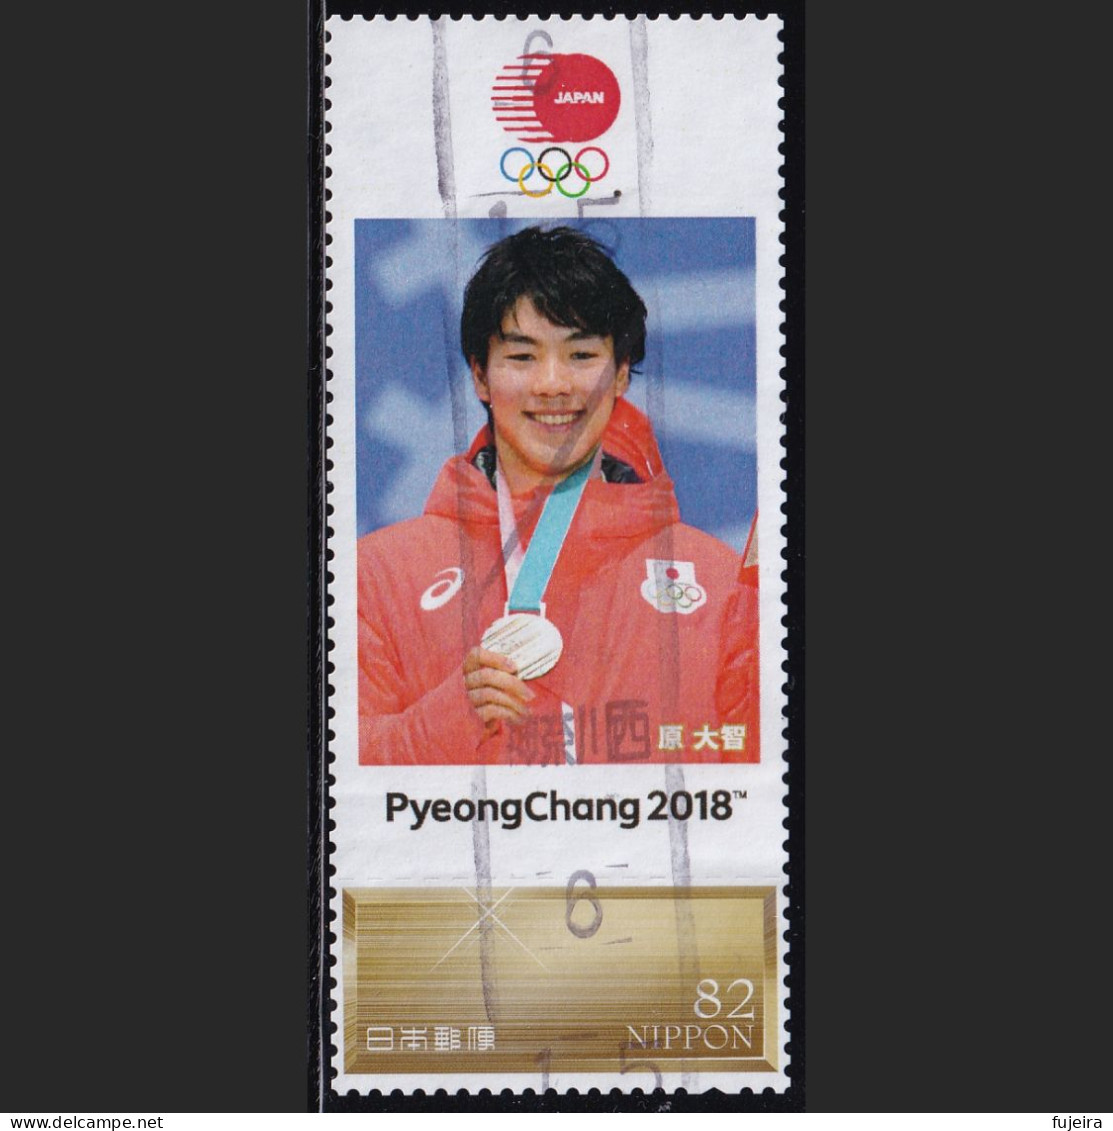 Japan Personalized Stamp, Olympic Games PyeongChang 2018 Hara Daichi (jpw0097) Used - Used Stamps